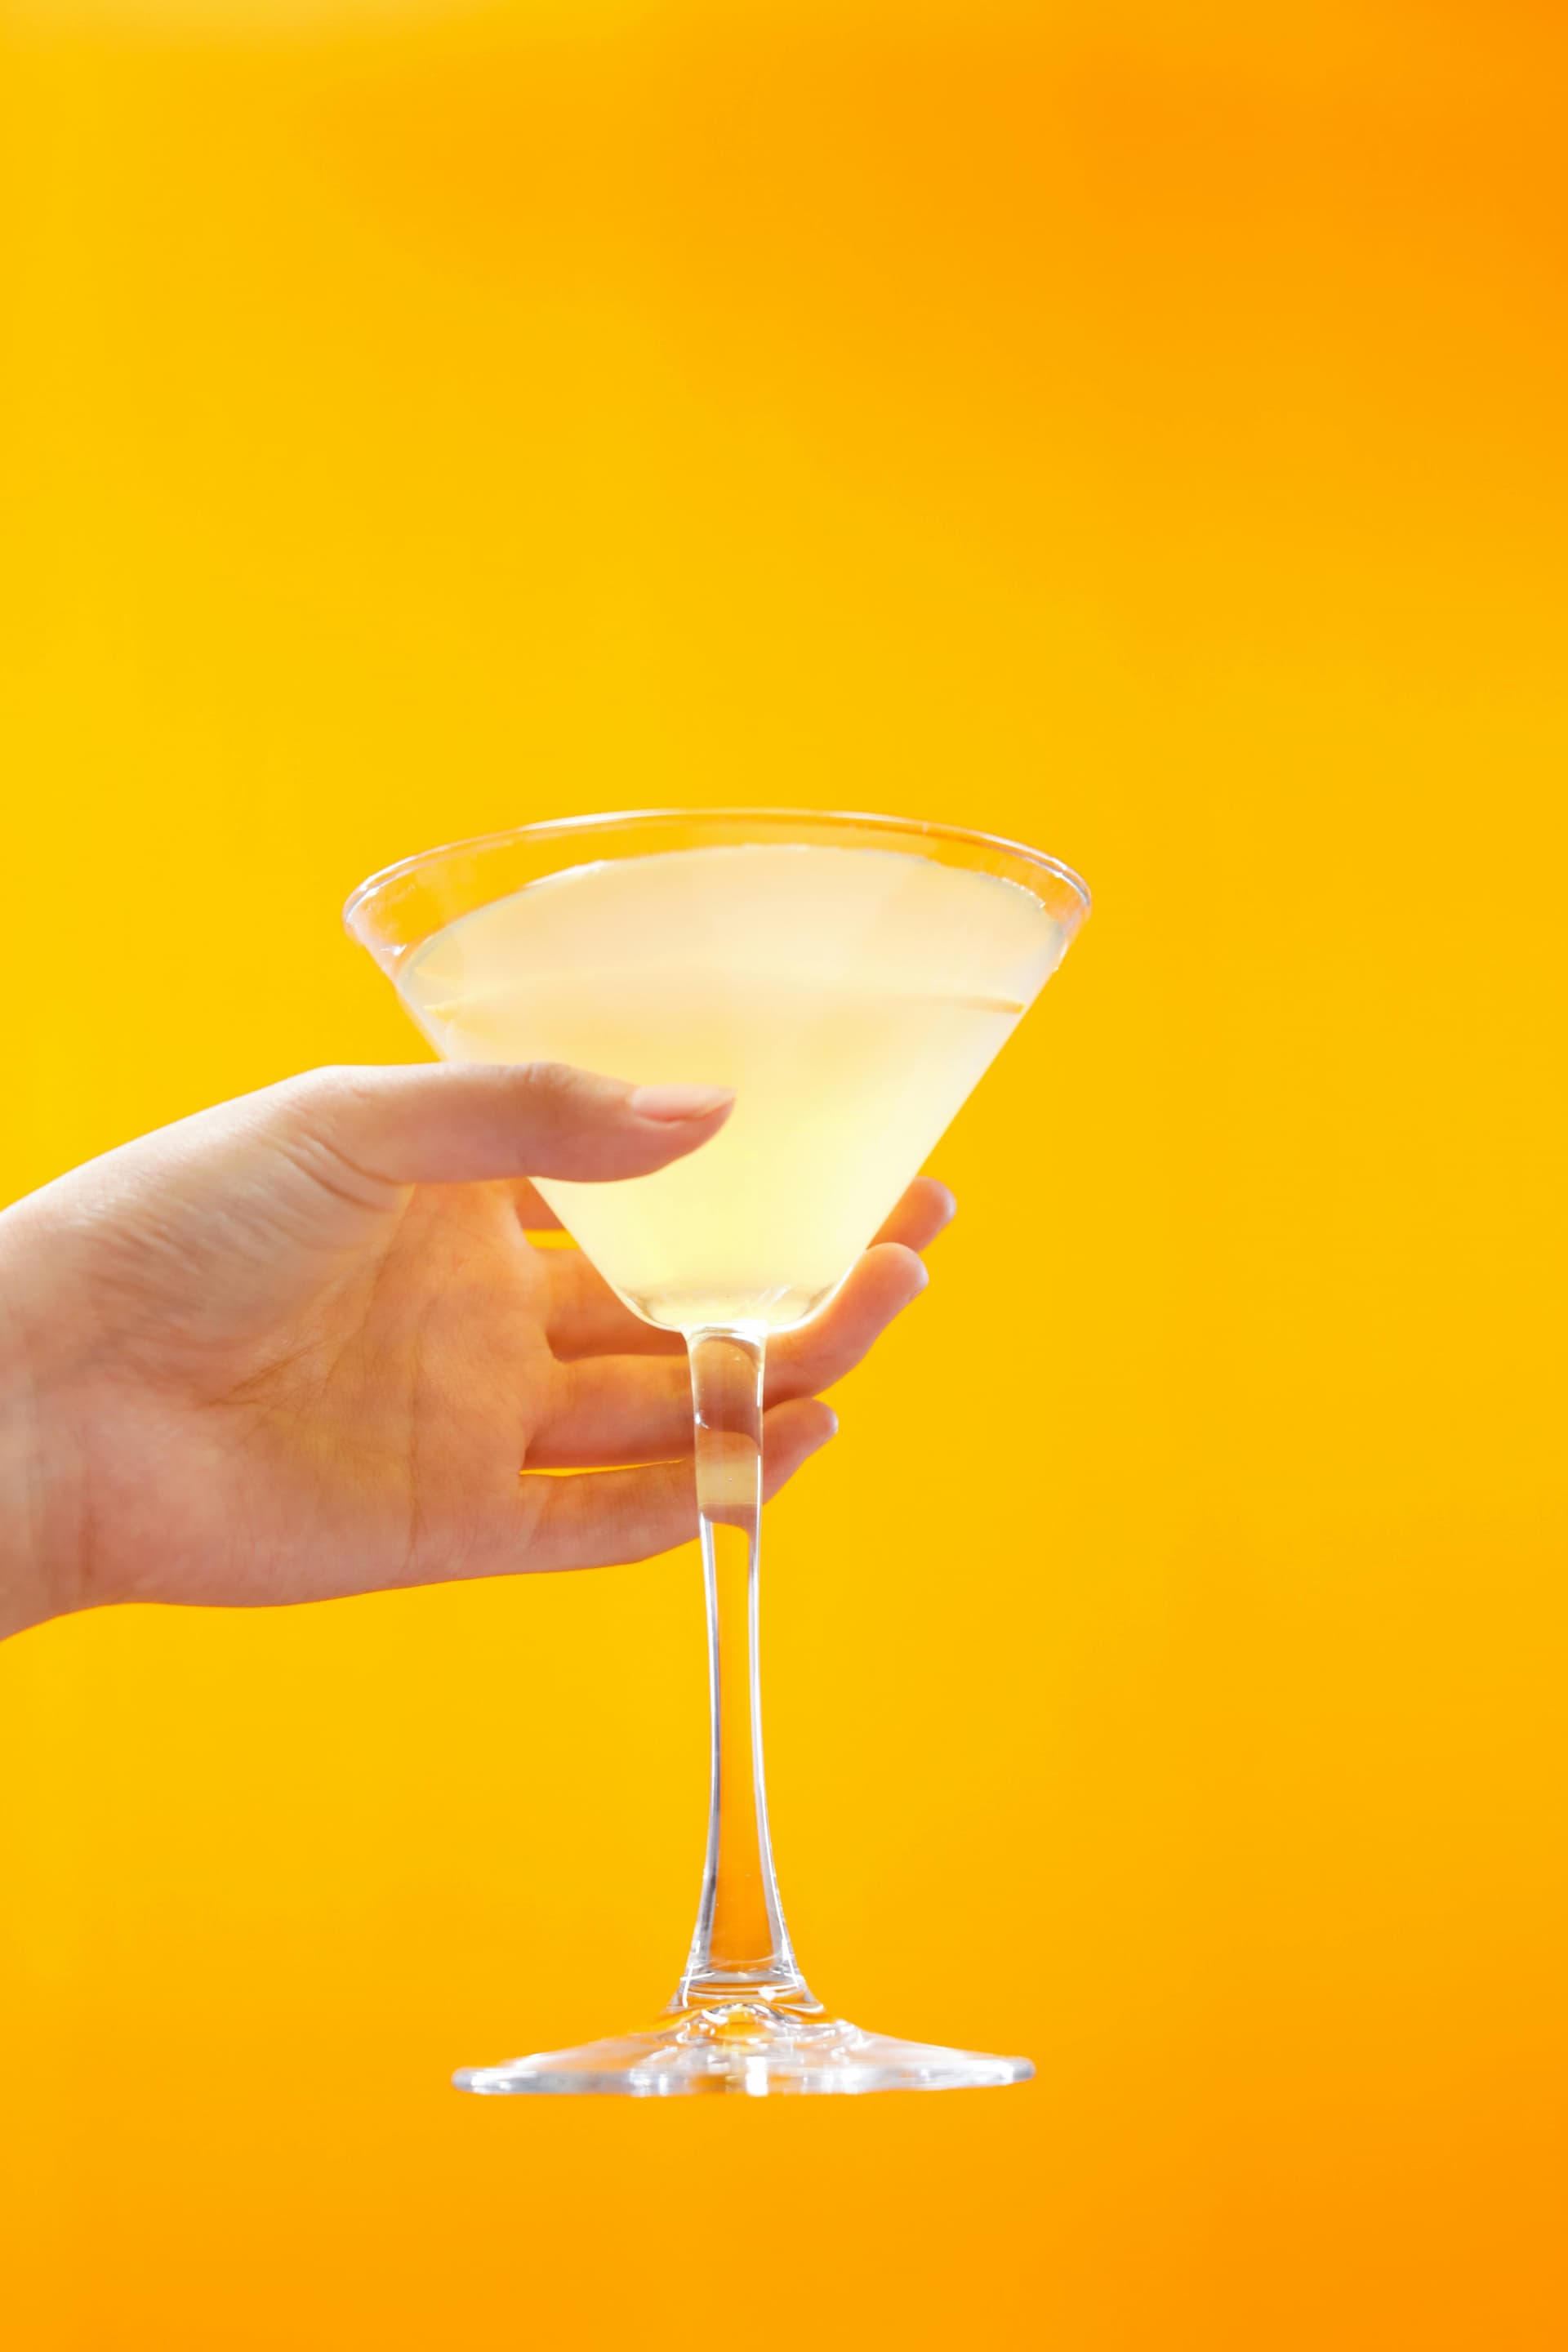 For The Occasion Of Mother's Day, Iconic Cocktails With A Twist (Of Course!)